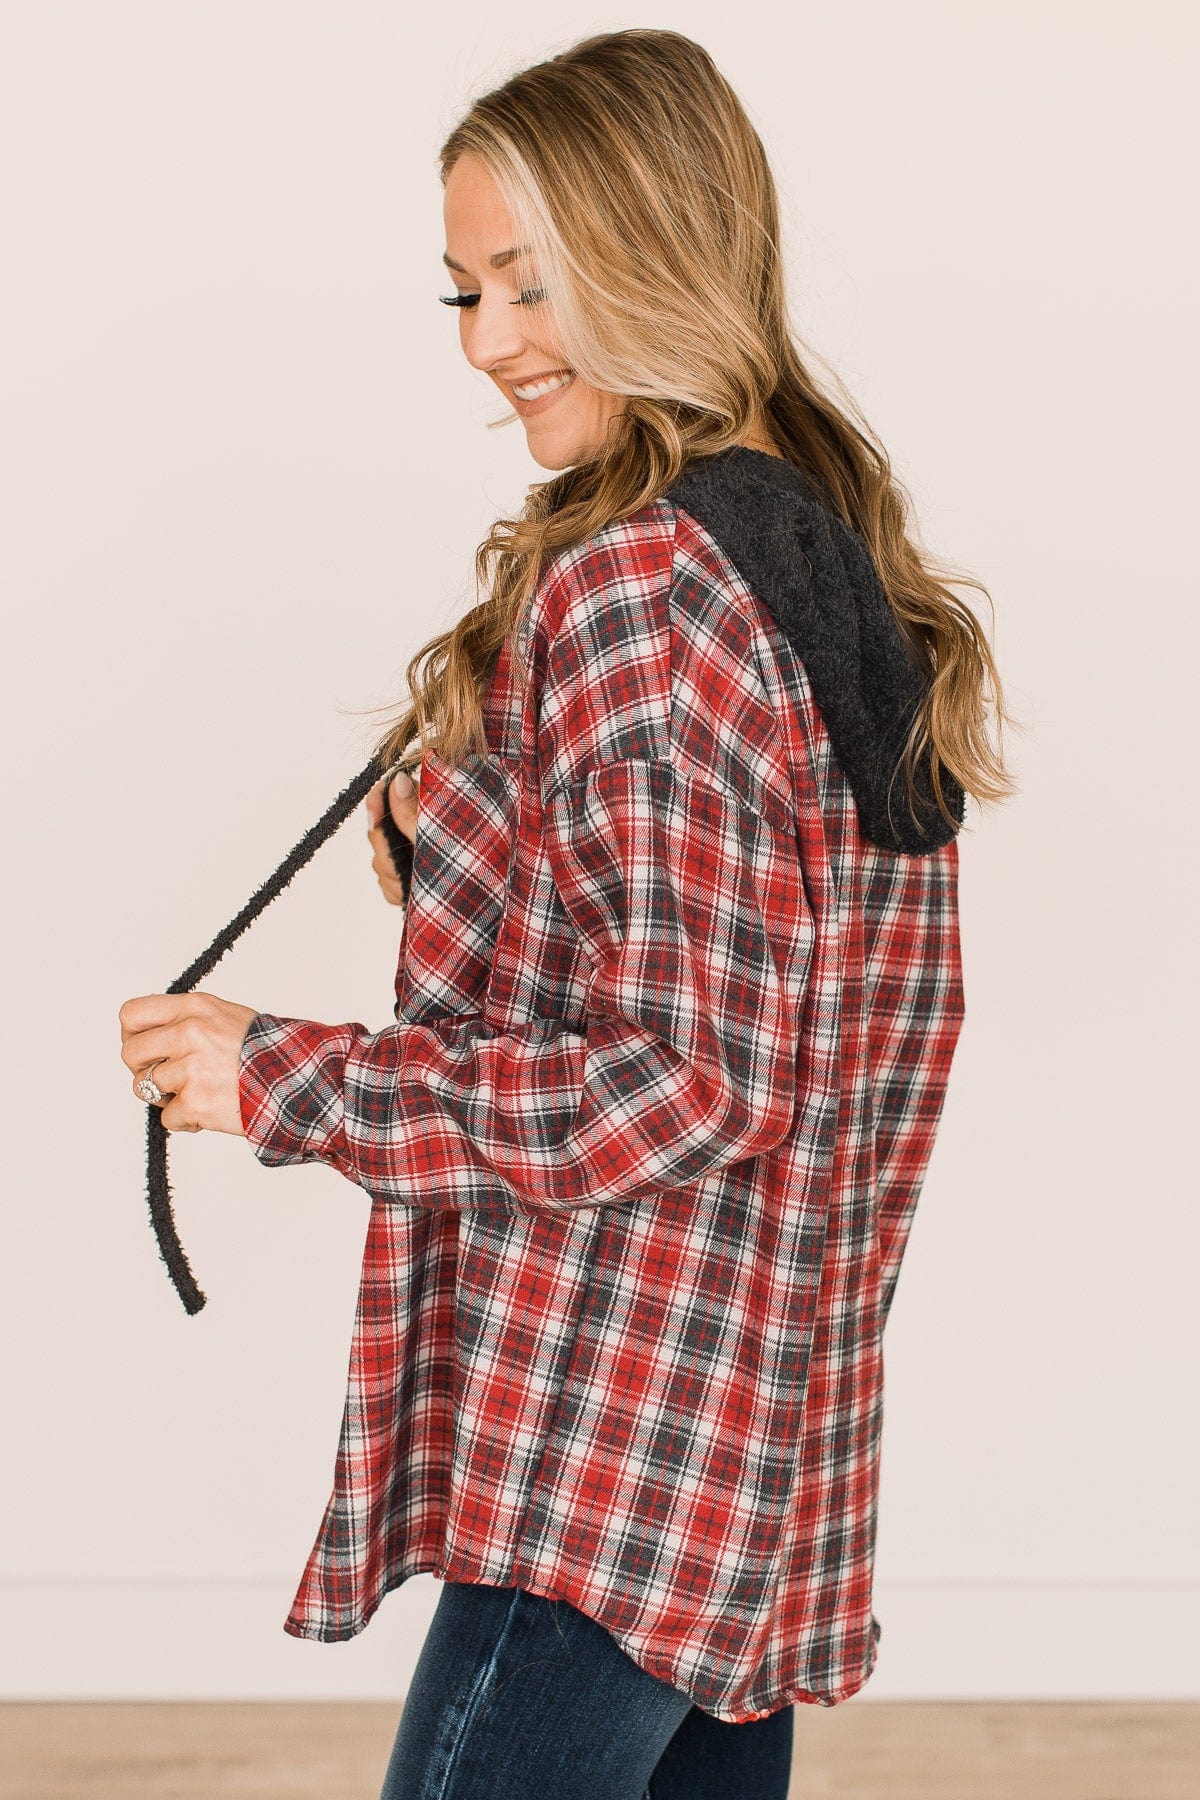 Take The Leap Hooded Plaid Top- Red & Charcoal